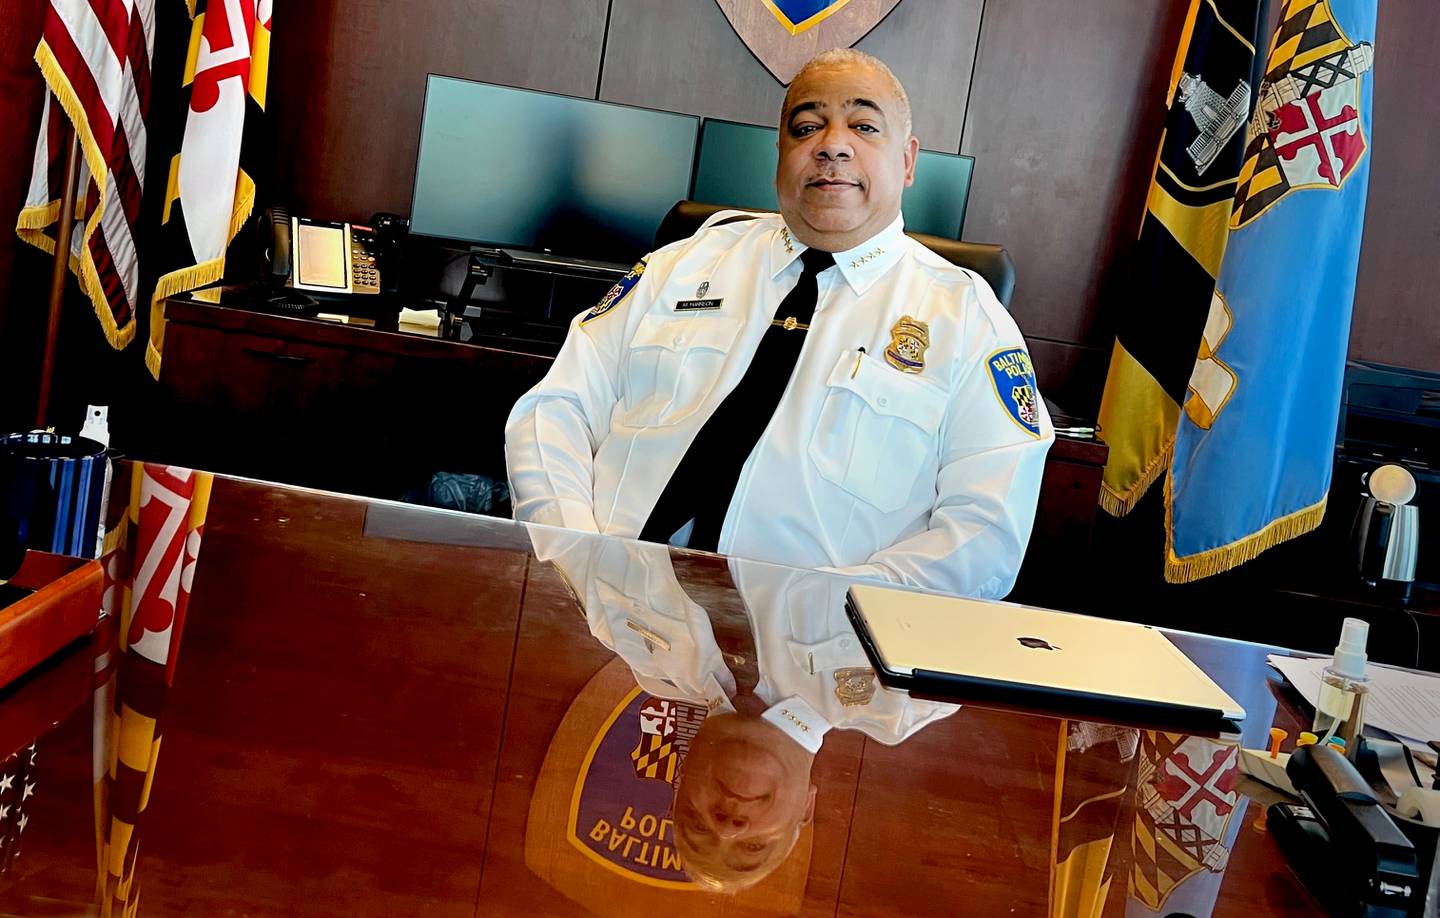 Baltimore Chief of Police, Michael S. Harrison in his office.